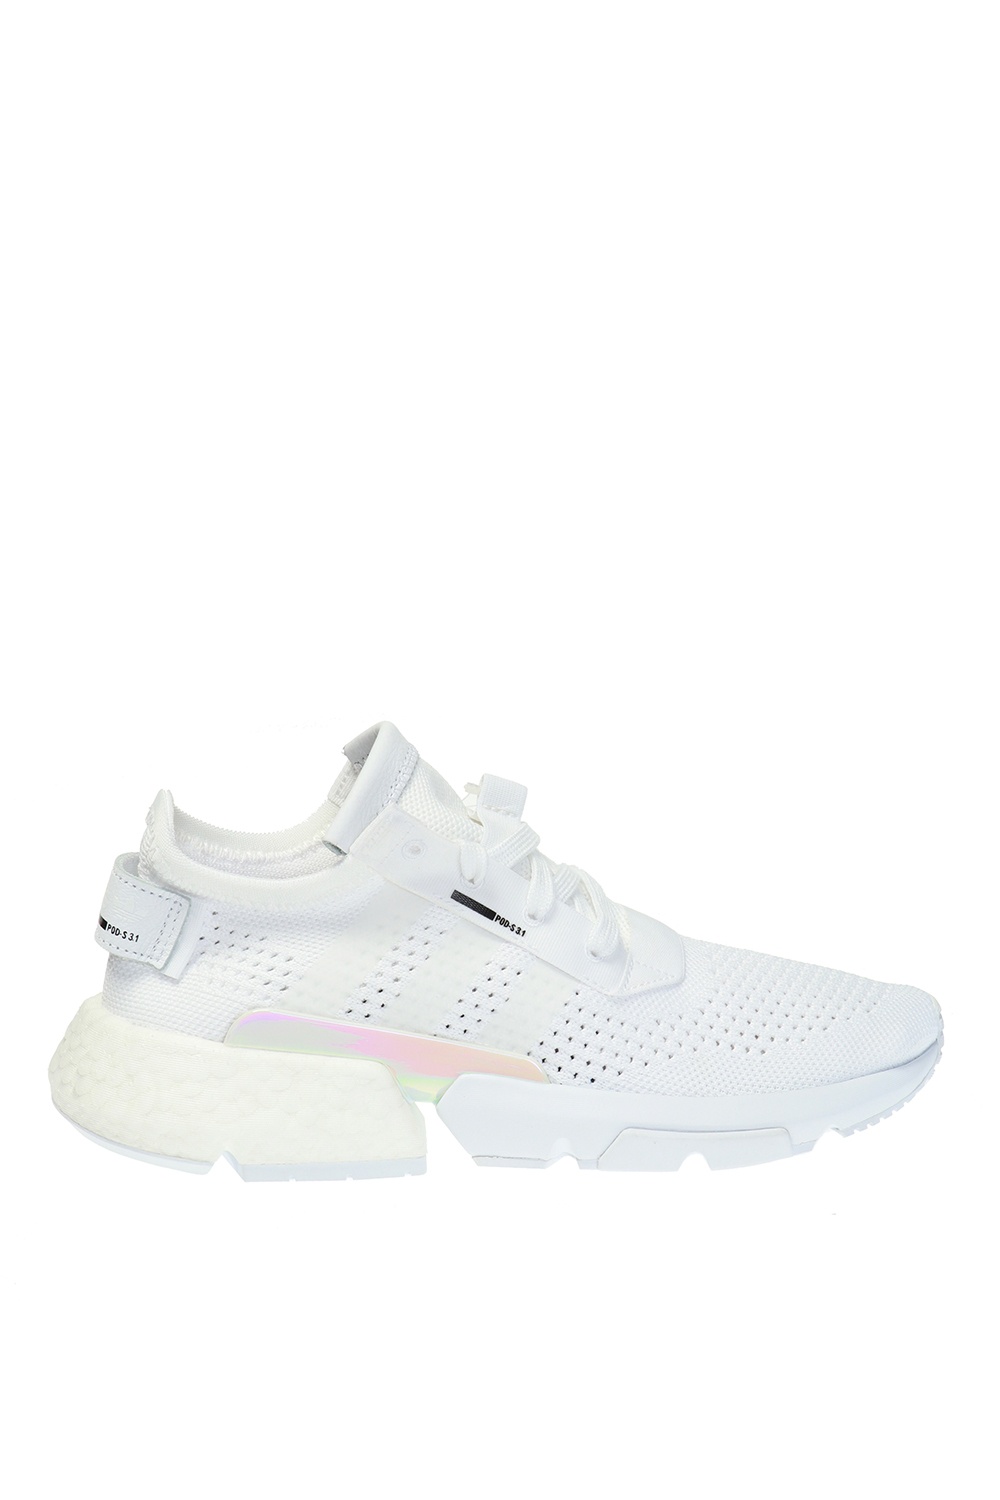 In front of you Lada Yeah ADIDAS Originals 'POD-S3' sport shoes | Women's Shoes | Vitkac